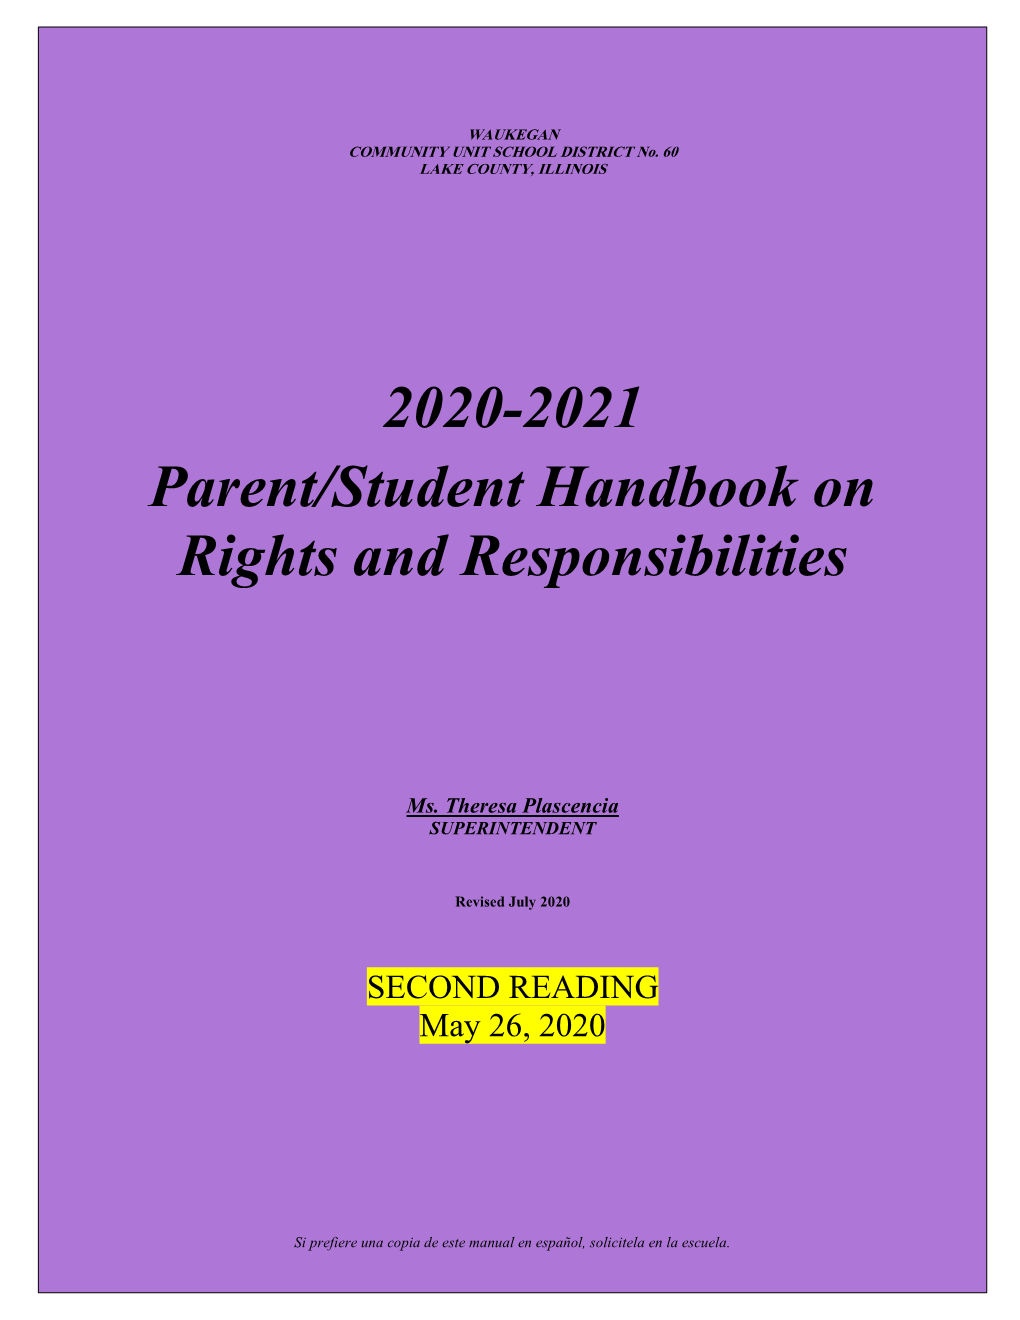 2020-2021 Parent/Student Handbook on Rights and Responsibilities